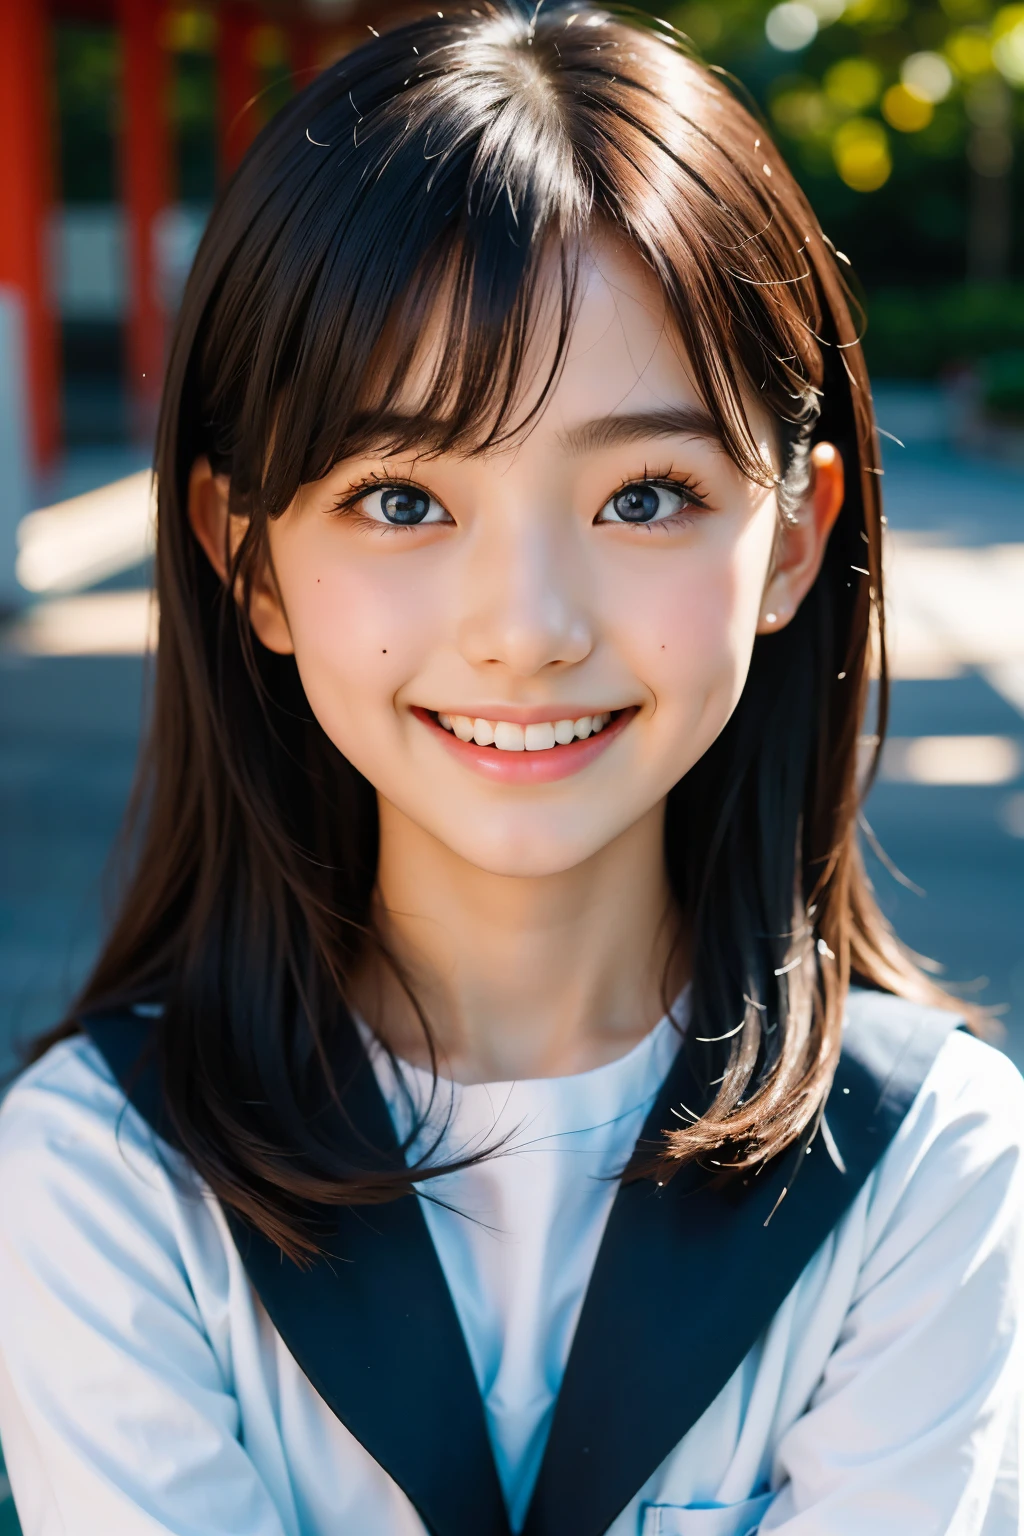 lens: 135mm f1.8, (highest quality),(RAW Photos), (Tabletop:1.1), (Beautiful 17 year old Japan girl), Cute face, (Deeply chiseled face:0.7), (freckles:0.4), dappled sunlight, Dramatic lighting, (Japanese School Uniform), (On campus), shy, (Close-up shot:1.2), (smile),, (Sparkling eyes)、(sunlight)